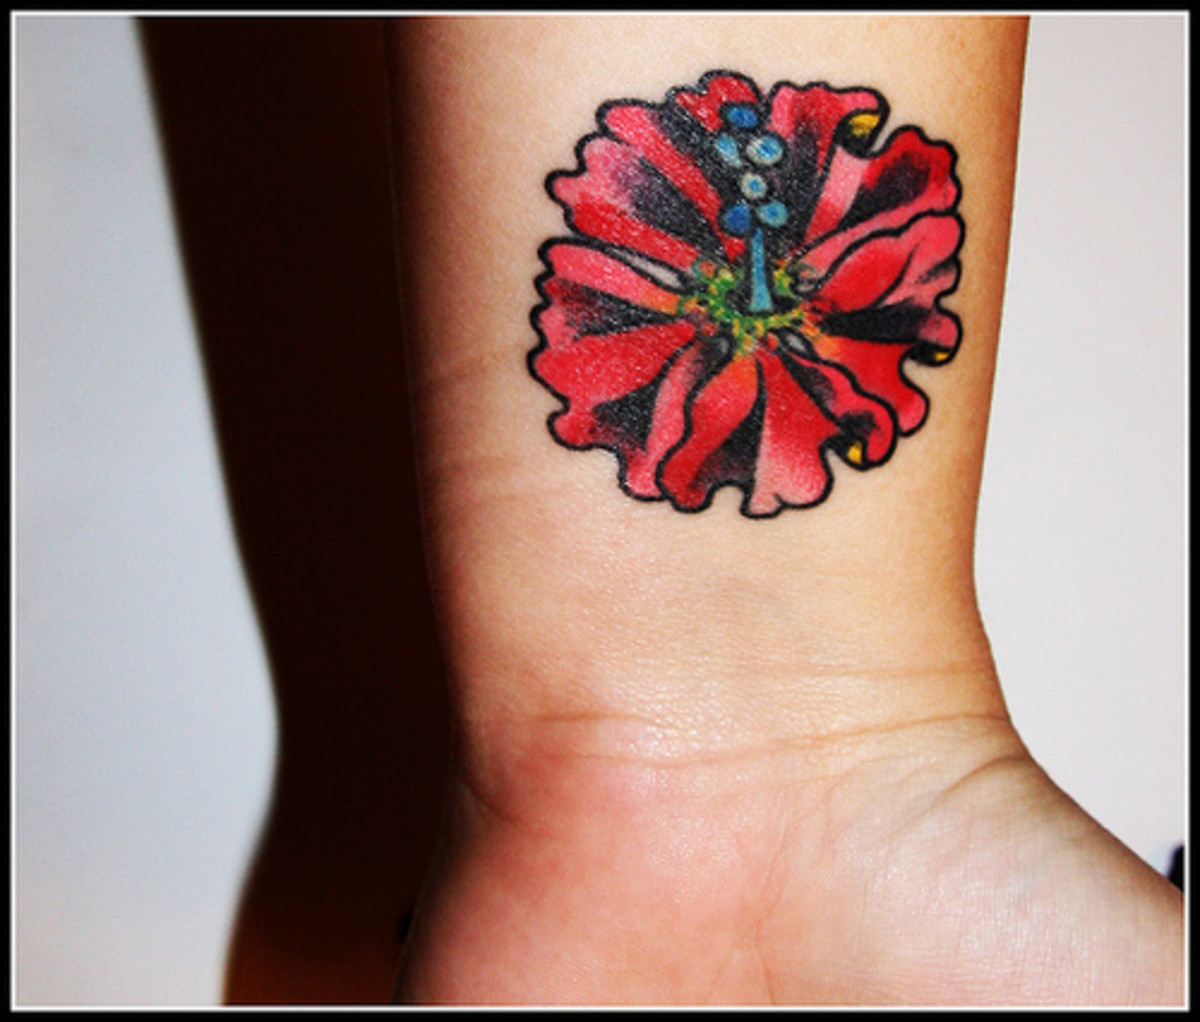 A vibrantly colored hibiscus tattoo